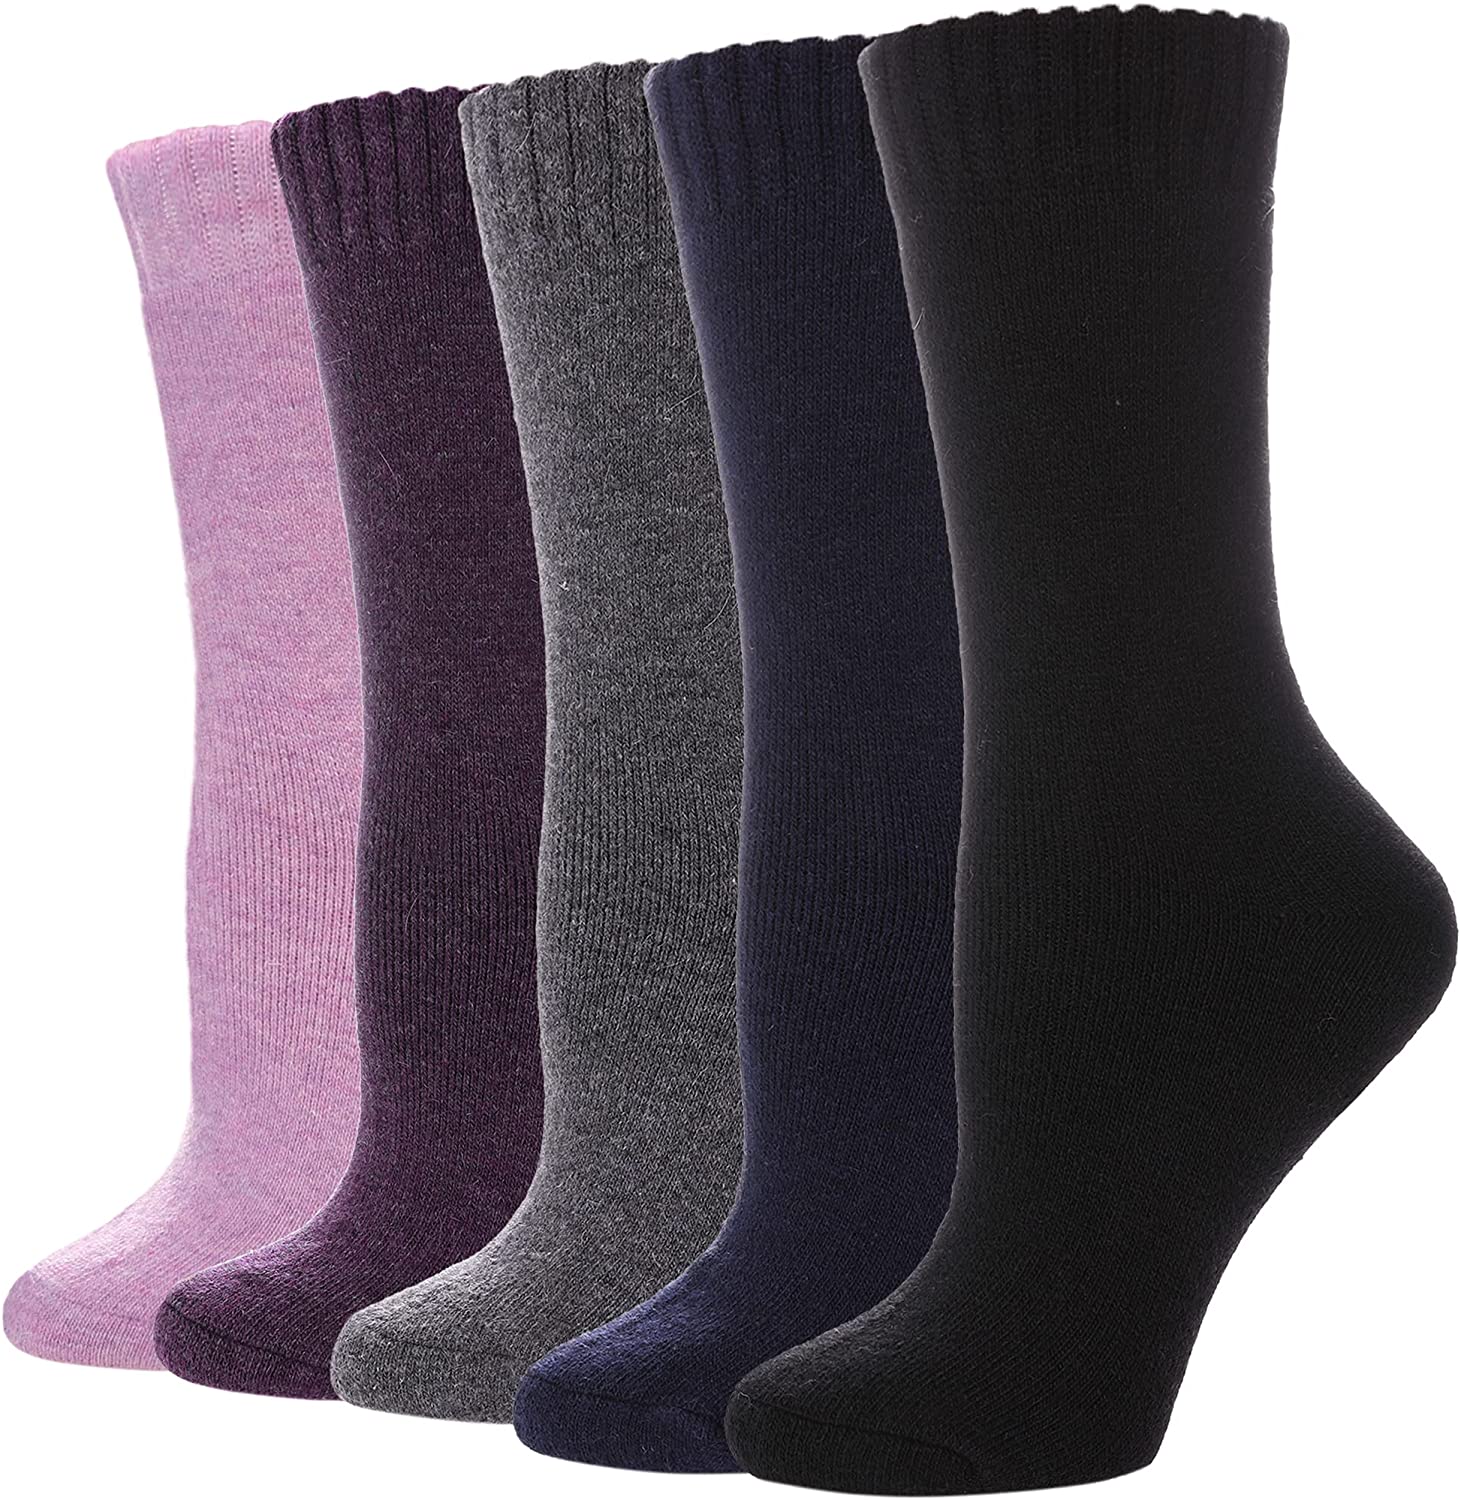 Details about   Womens 5 Pairs Soft Thick Comfort Casual Cotton Warm Wool Crew Winter Socks 